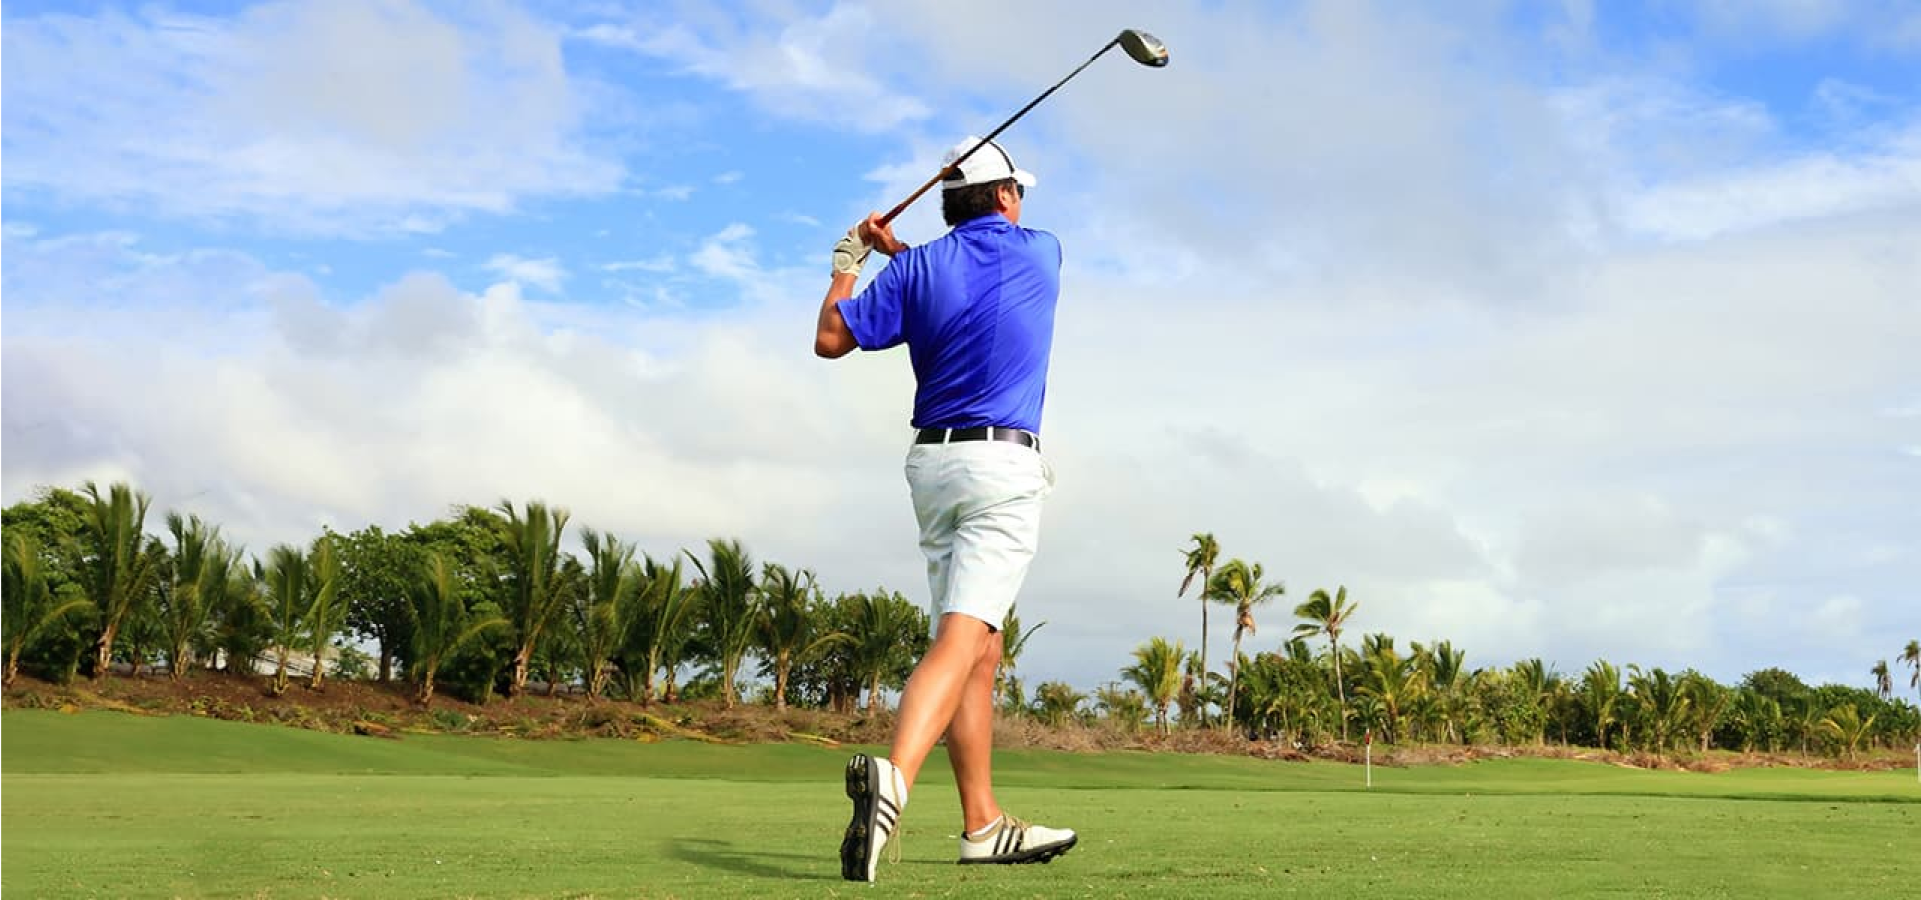 Golfer dressed in white shorts and a royal blue polo shirt gracefully swinging a golf club on a course surrounded by palm trees